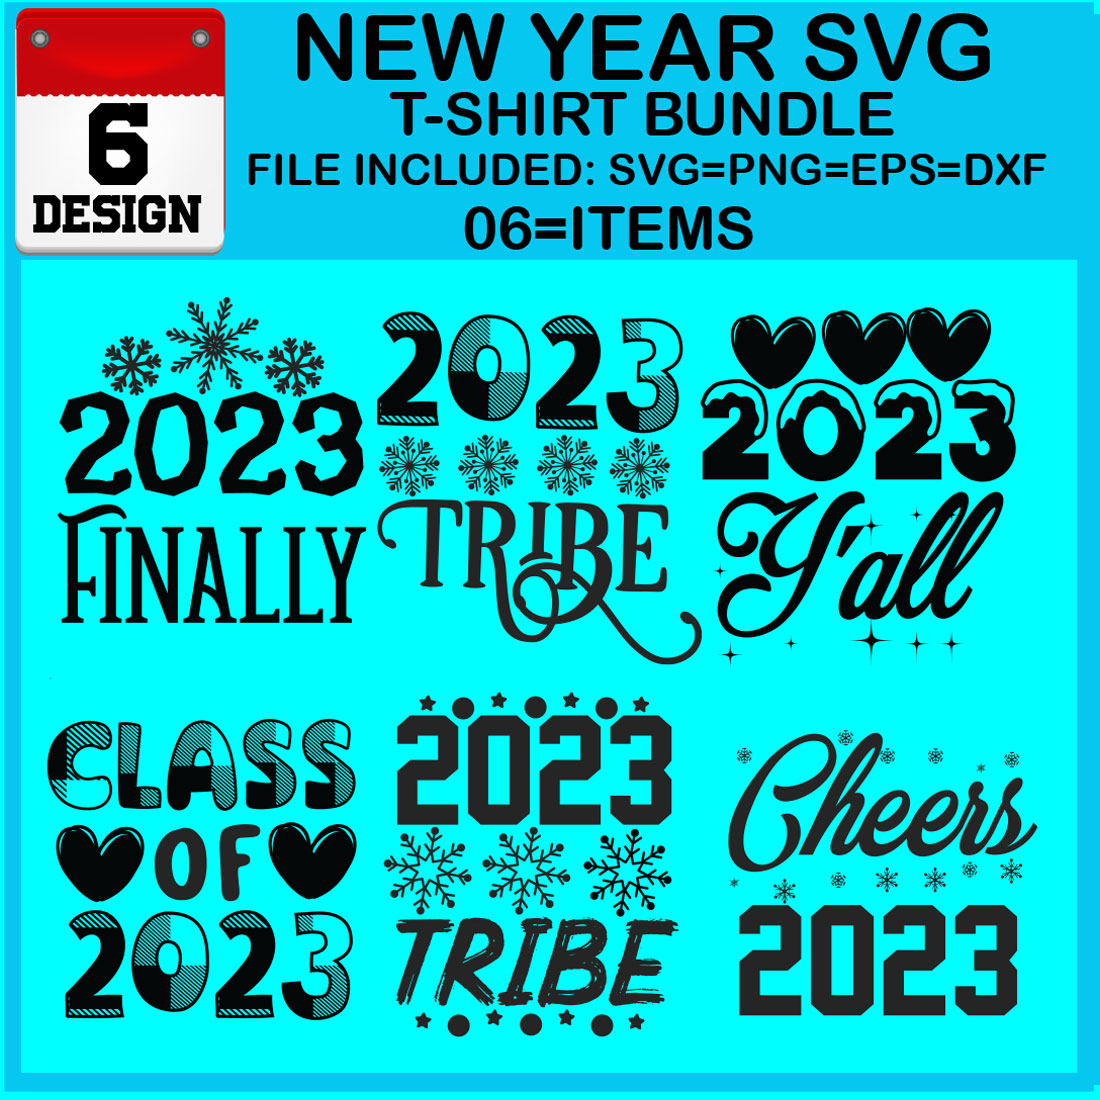 New Year 6 SVG T-shirt Bundle cover image.